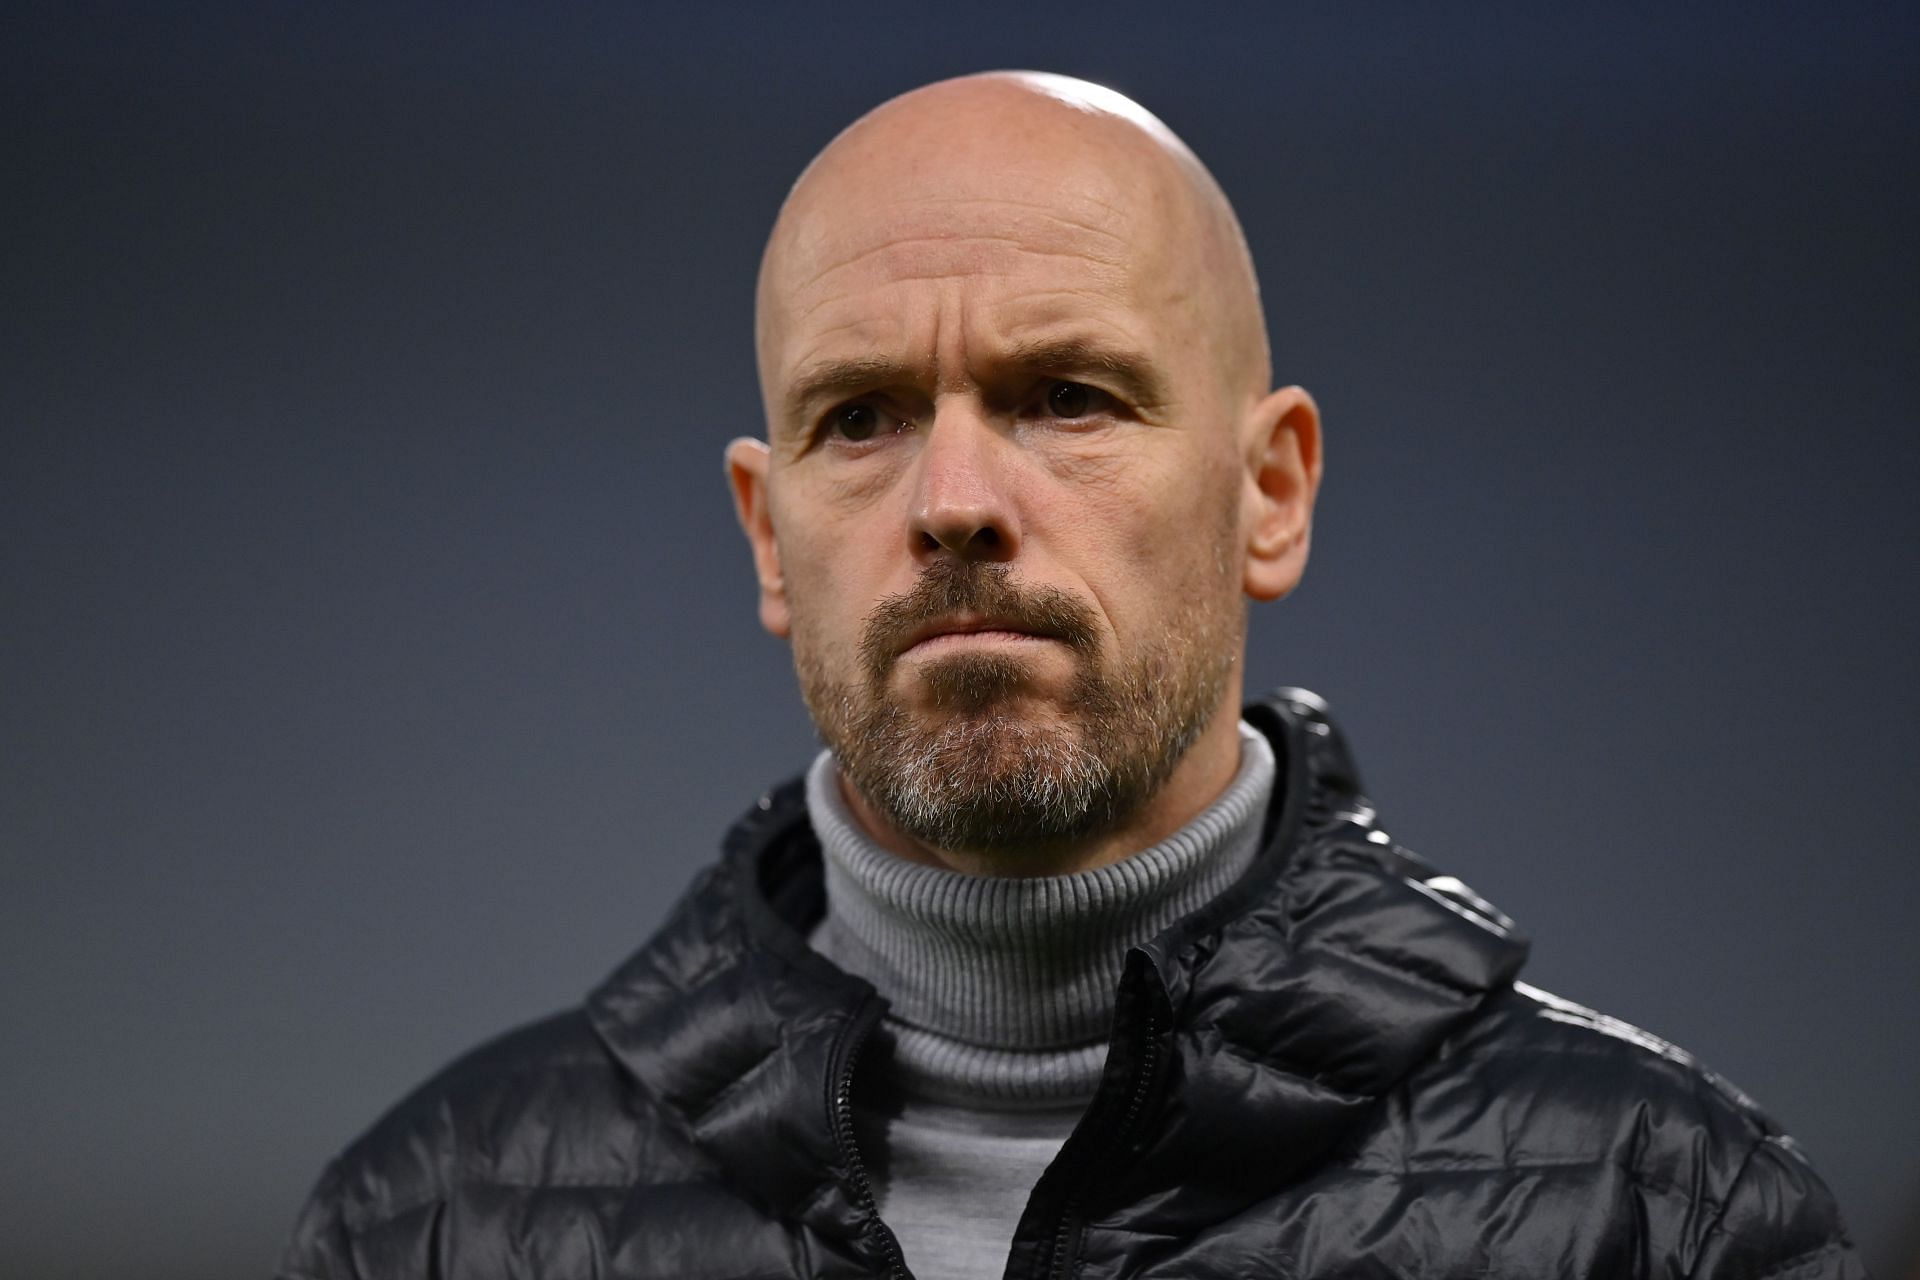 Ten Hag is annoyed with Gakpo joining Liverpool.